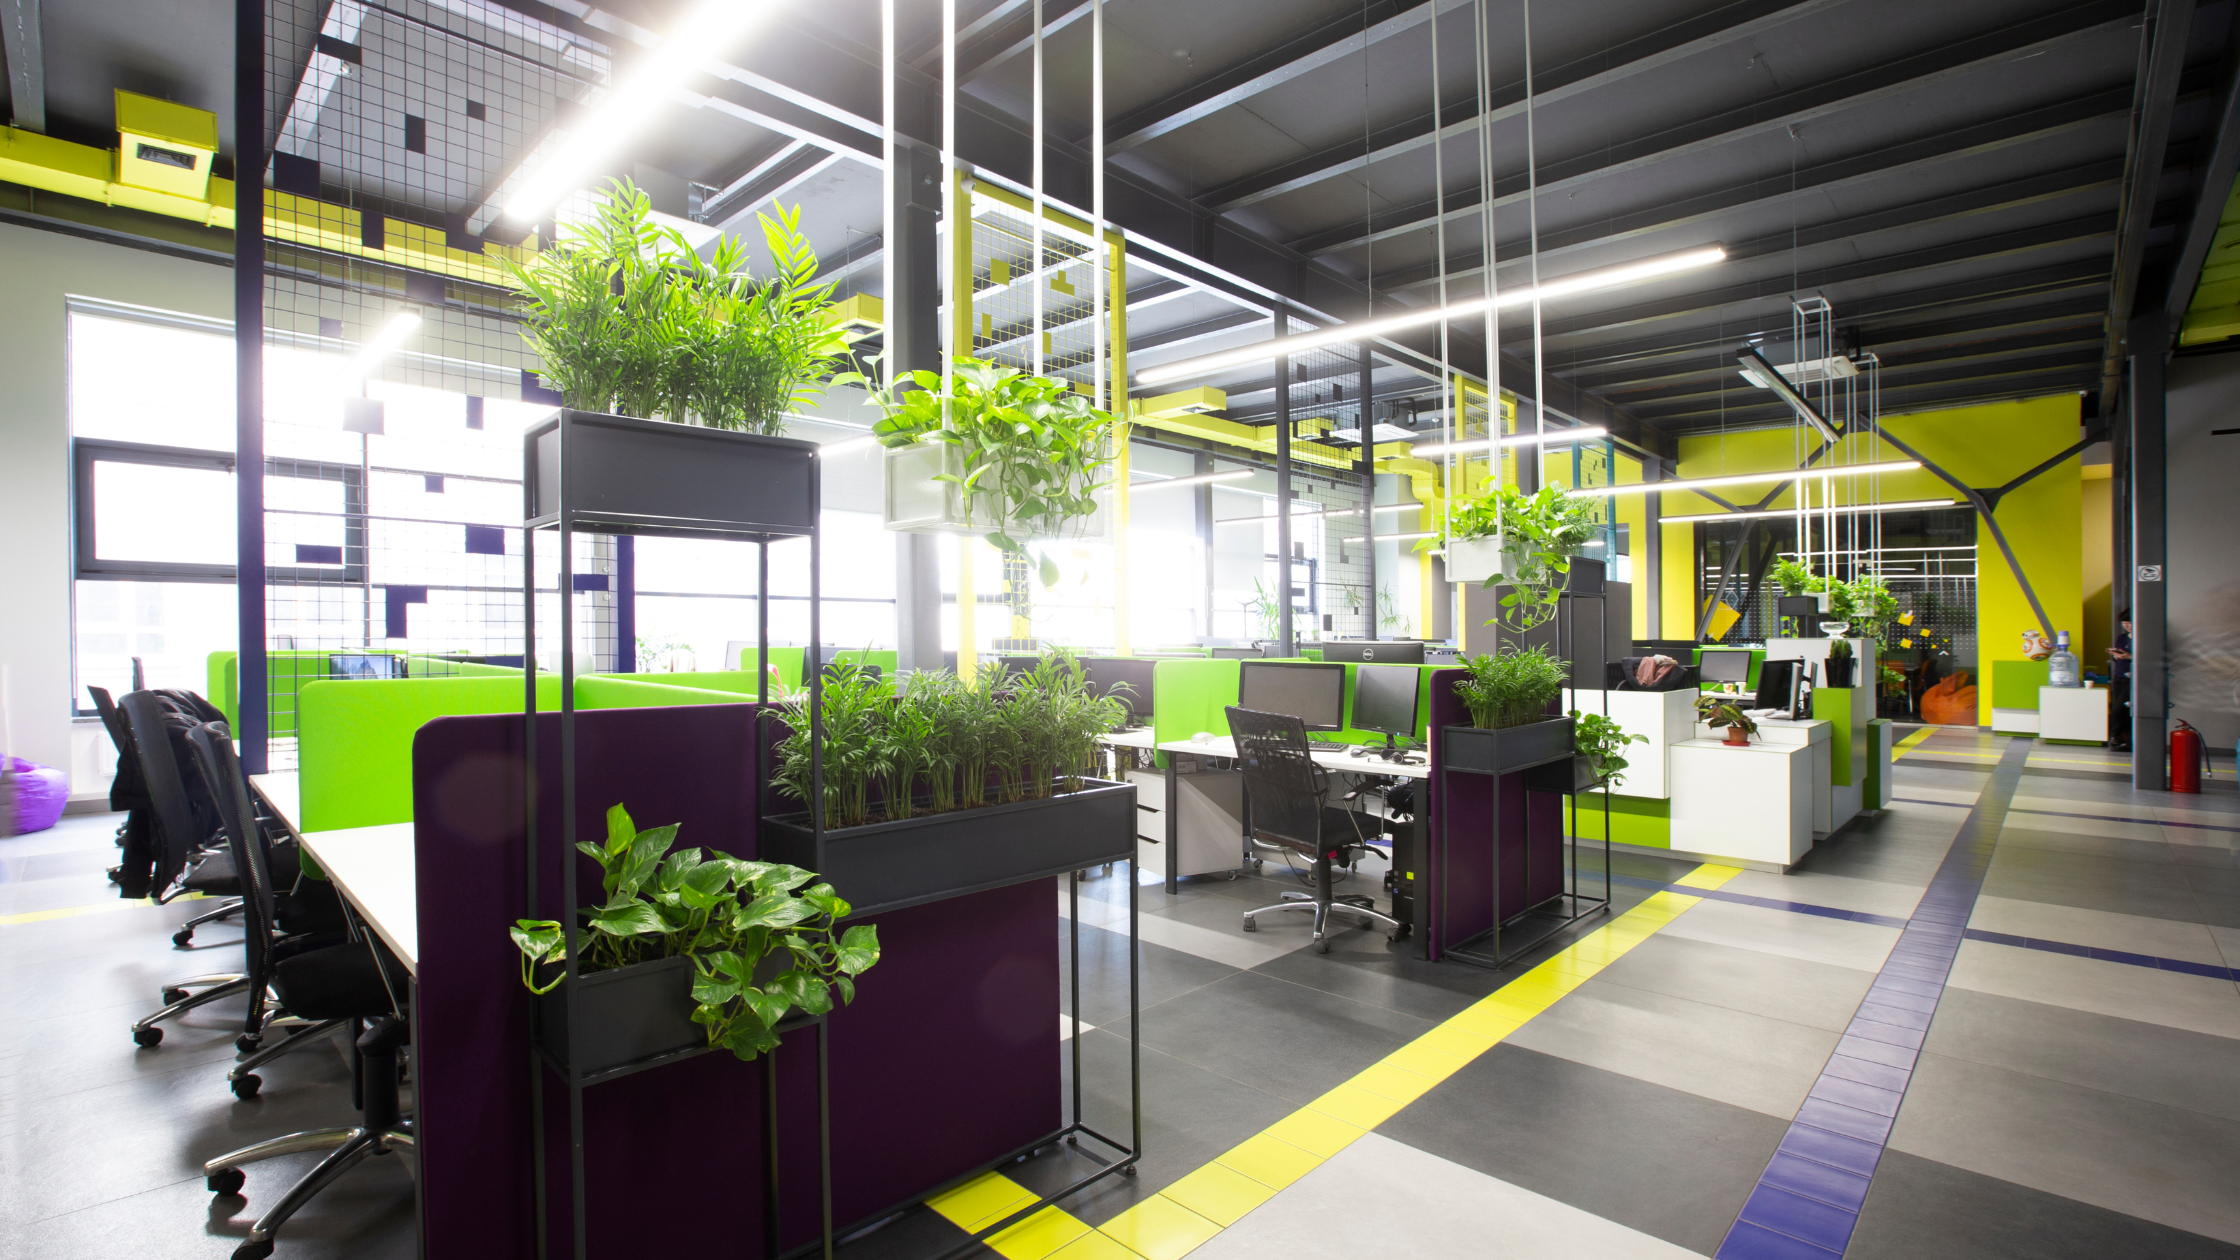 A green example of biophilic design in the office